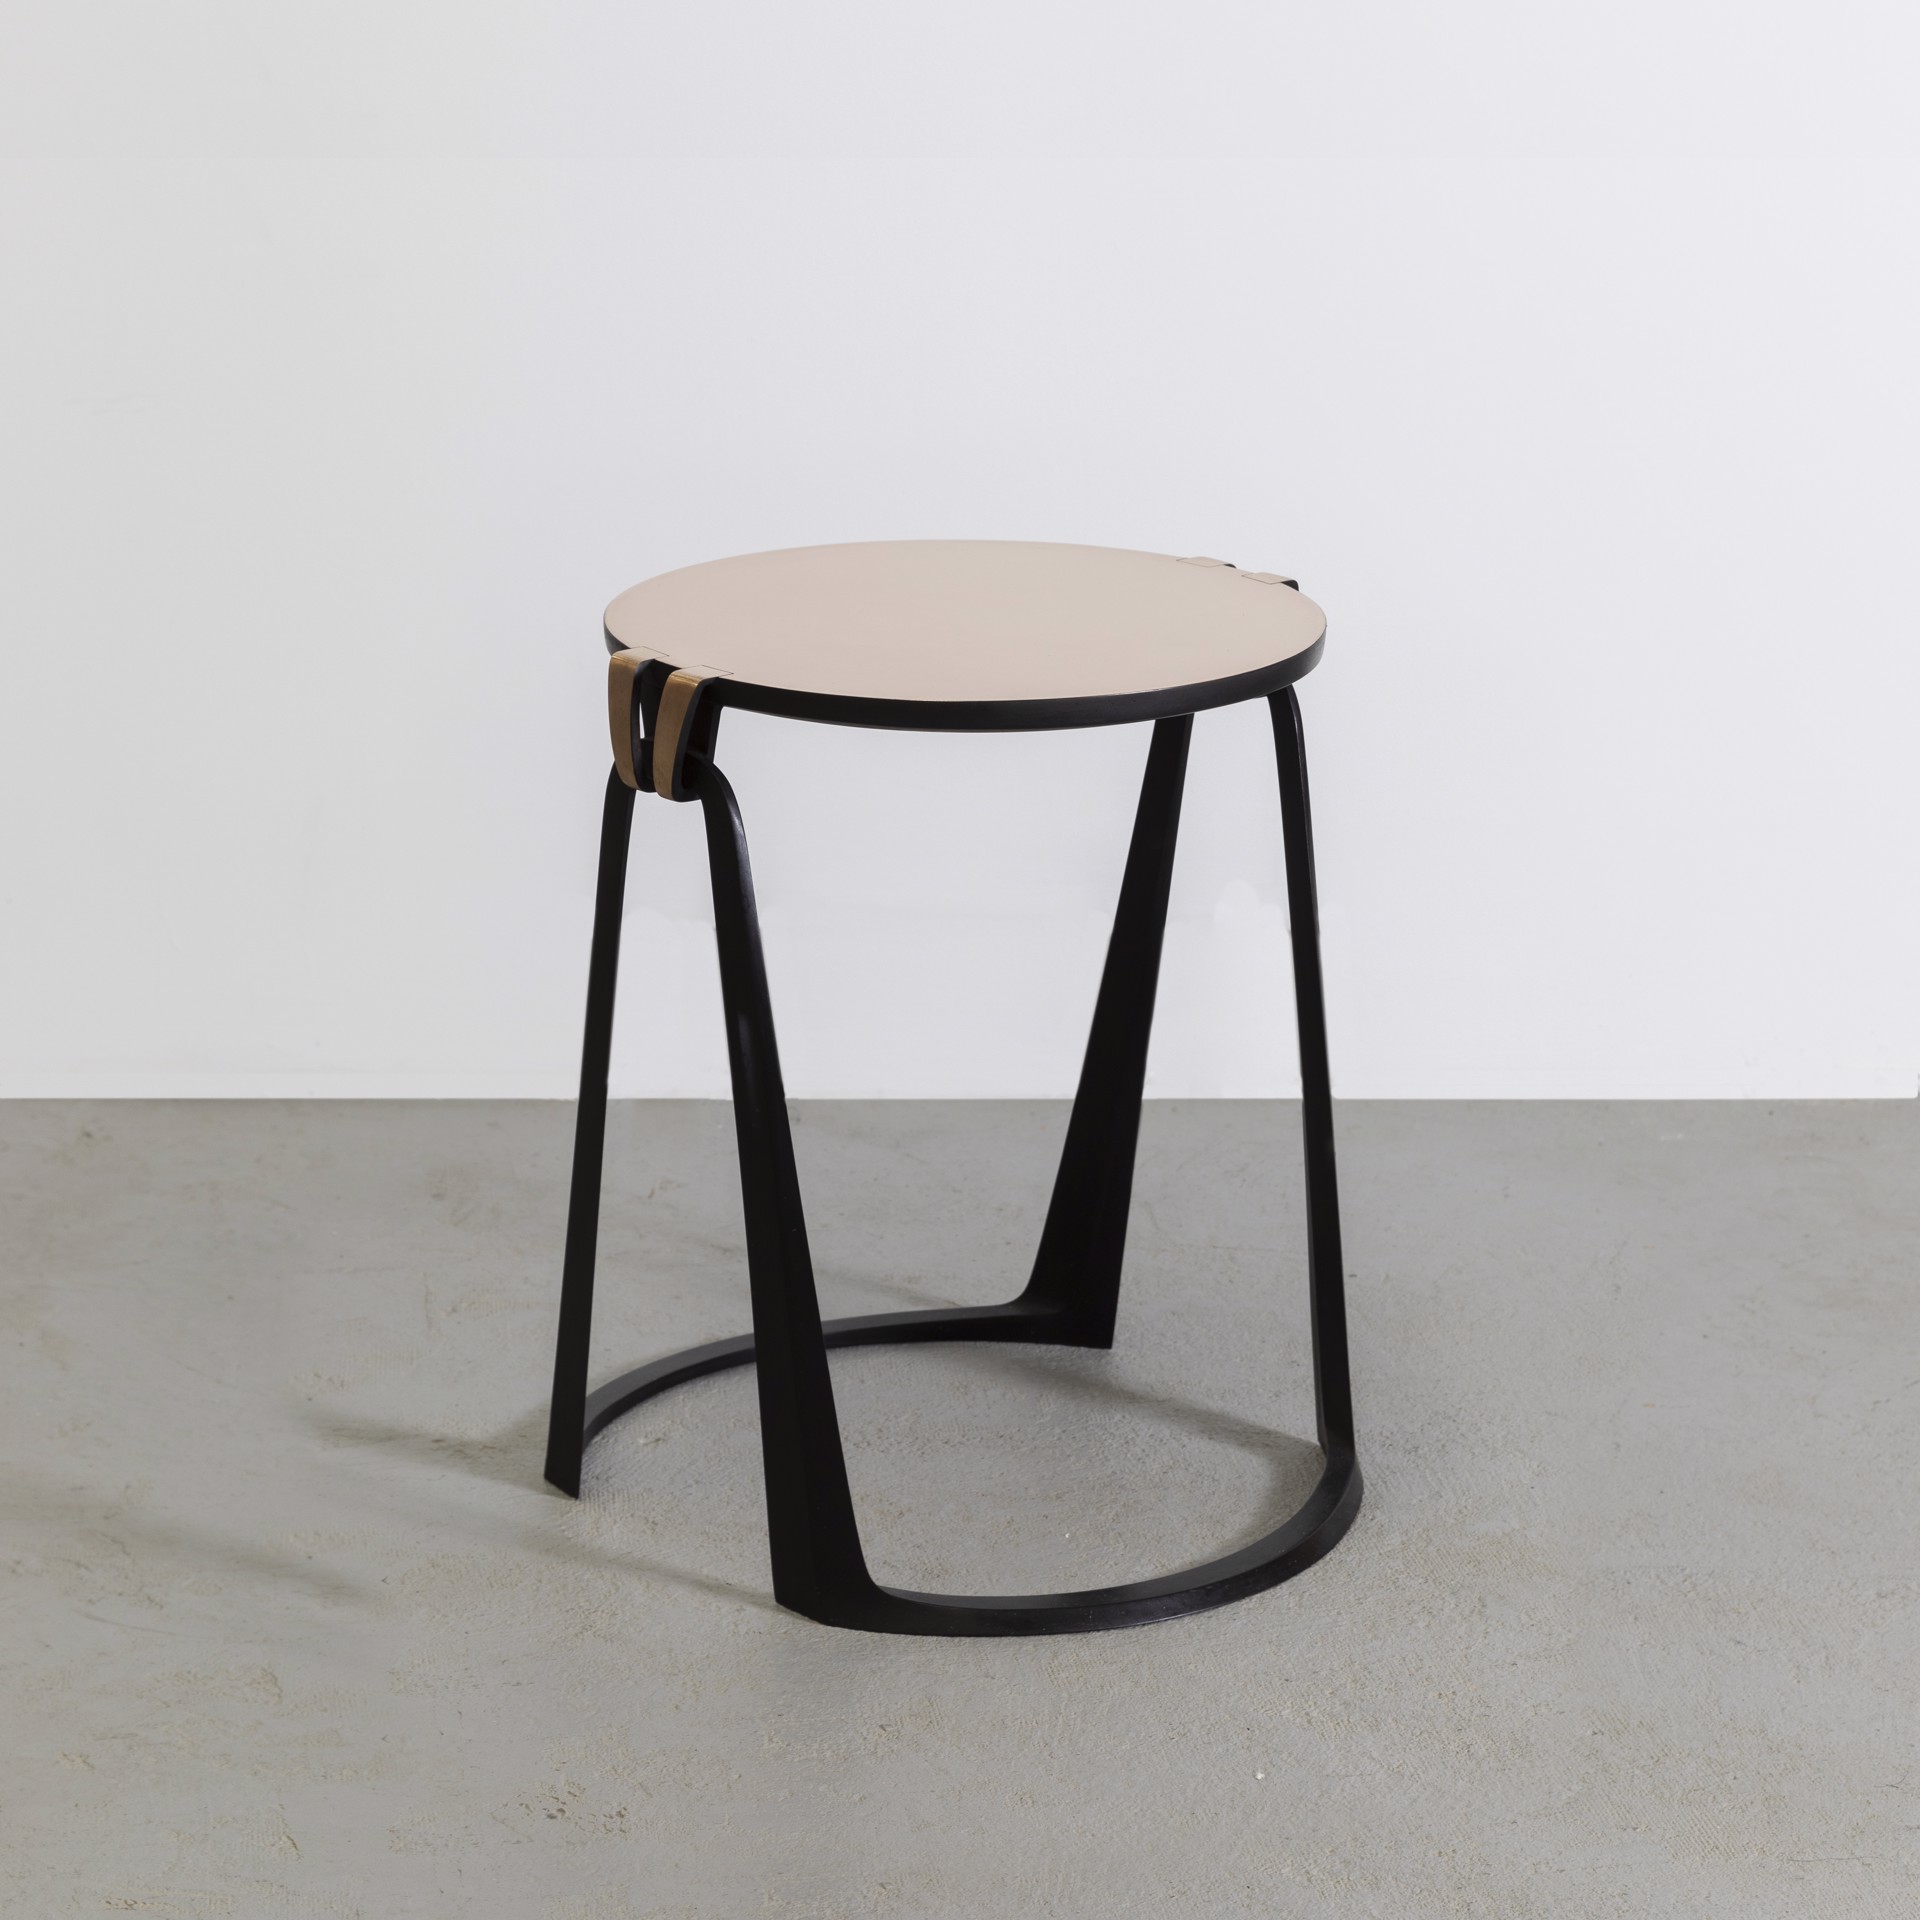 Side table "Link" by Anasthasia Millot